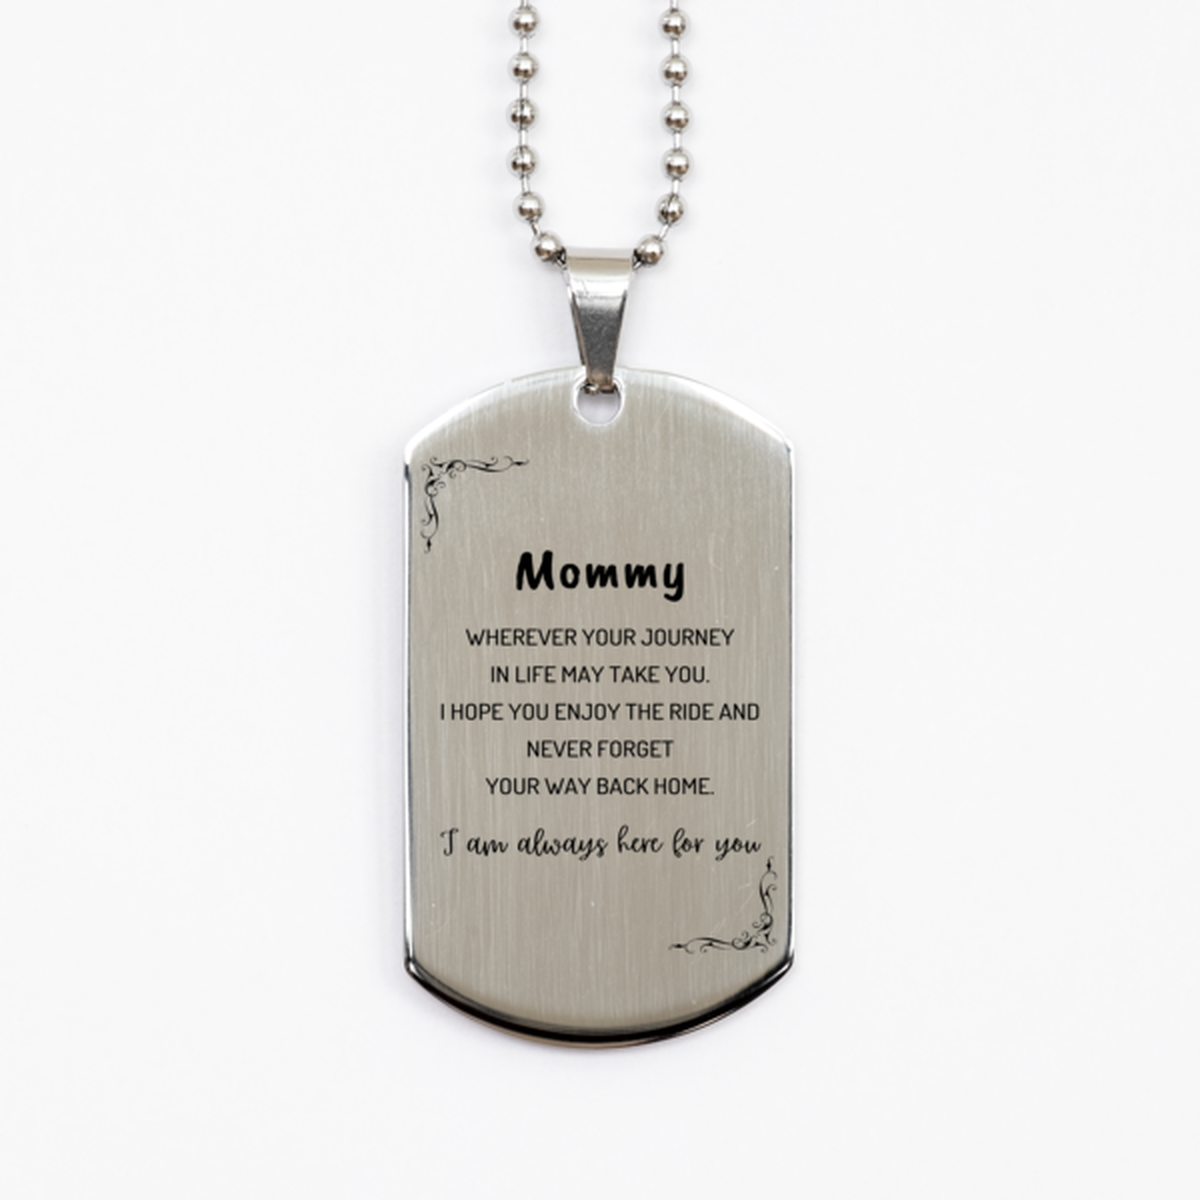 Mommy wherever your journey in life may take you, I am always here for you Mommy Silver Dog Tag, Awesome Christmas Gifts For Mommy, Mommy Birthday Gifts for Men Women Family Loved One